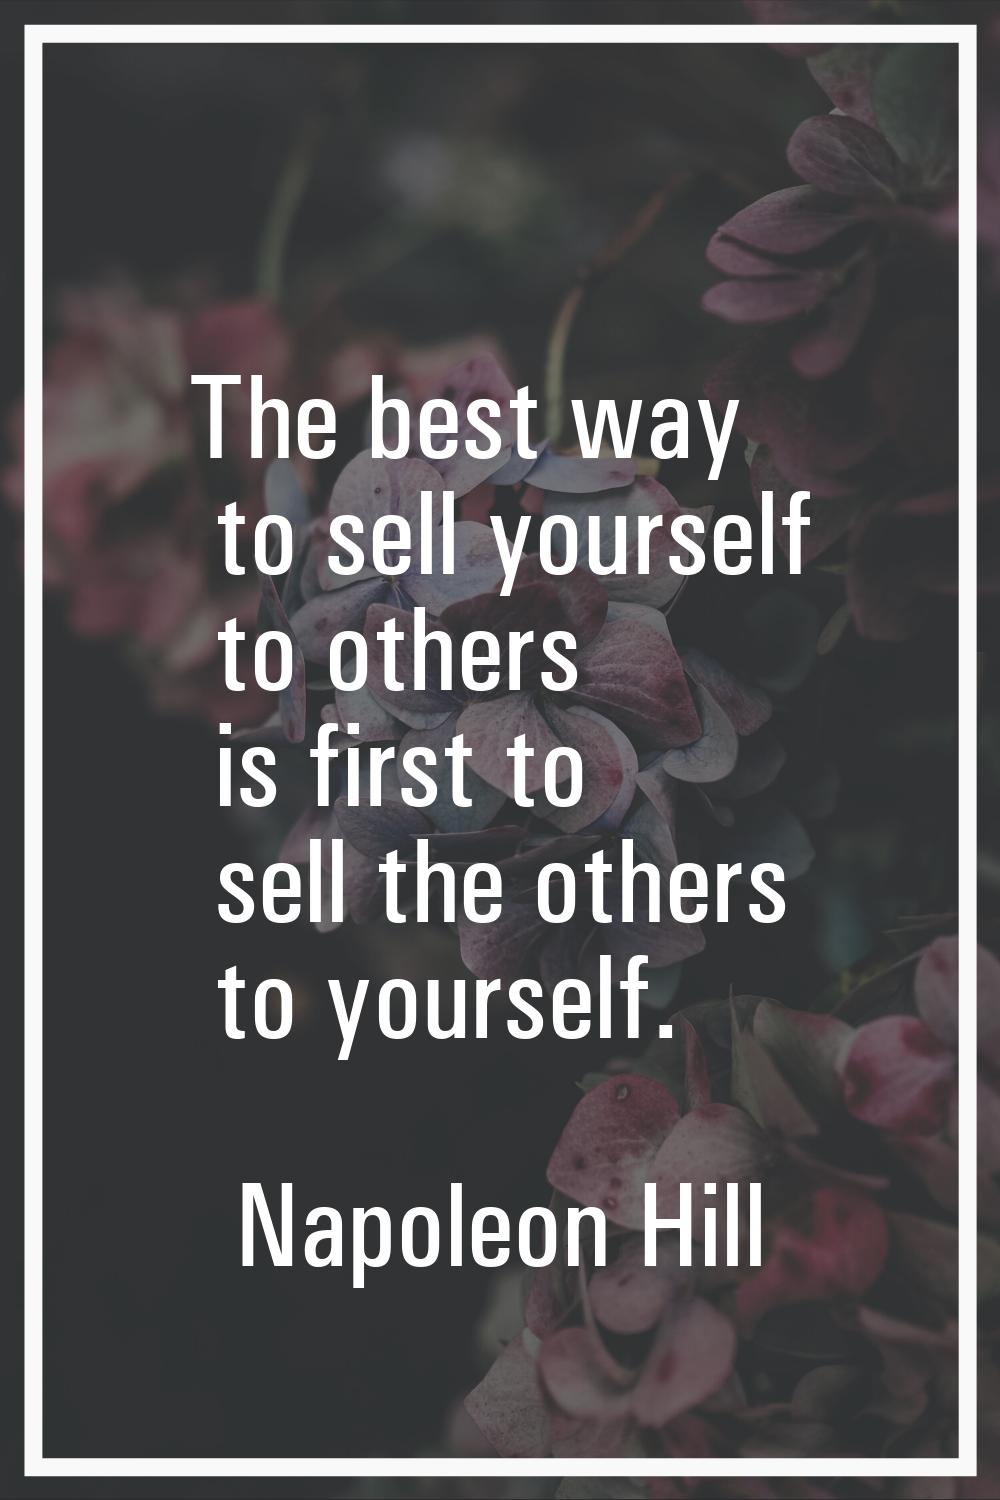 The best way to sell yourself to others is first to sell the others to yourself.